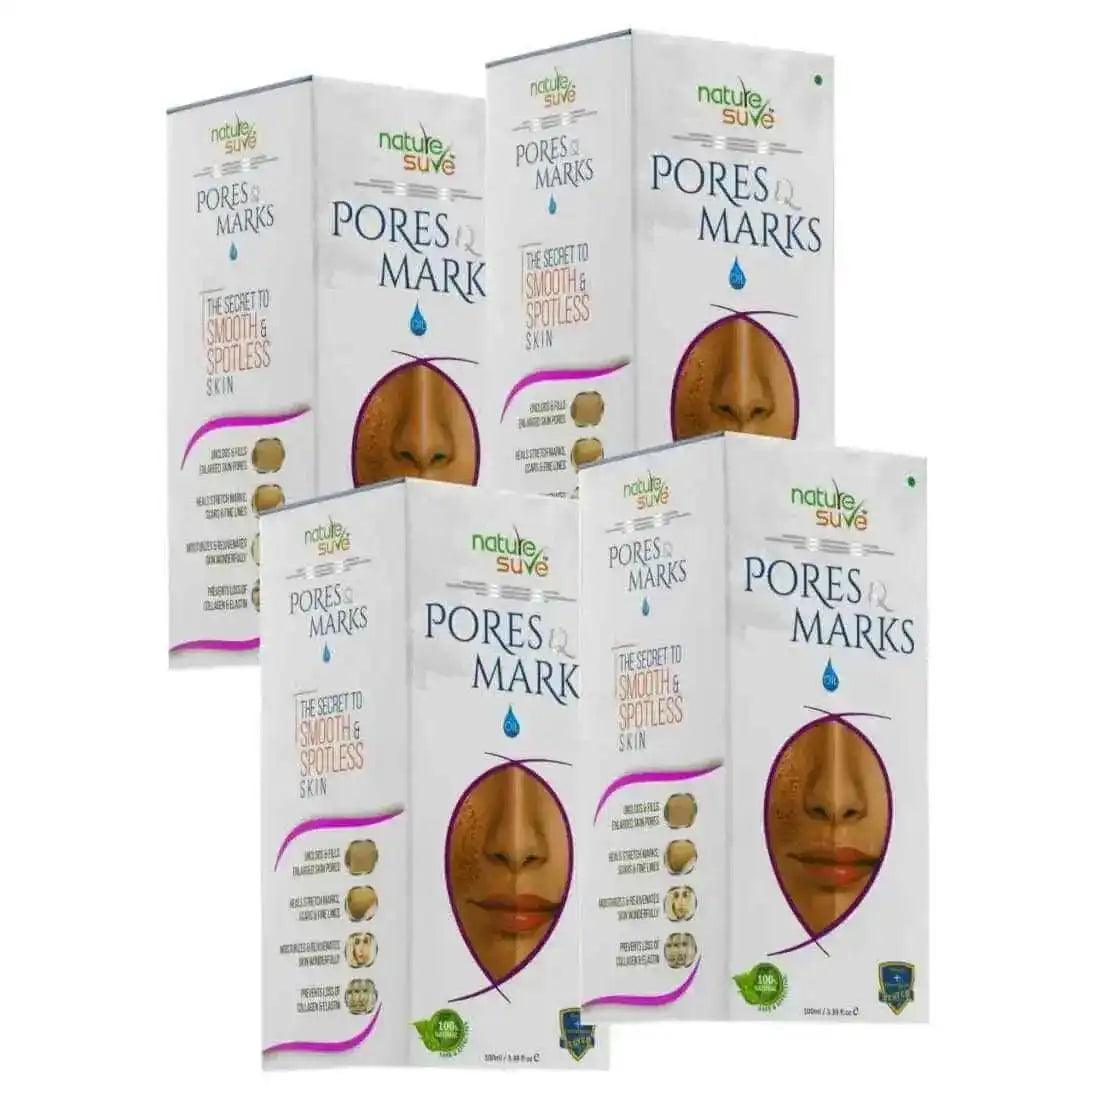 Buy 4 Packs Nature Sure Pores and Marks Oil for Enlarged Skin Pores, Stretch Marks and Fine Lines 8903540009453